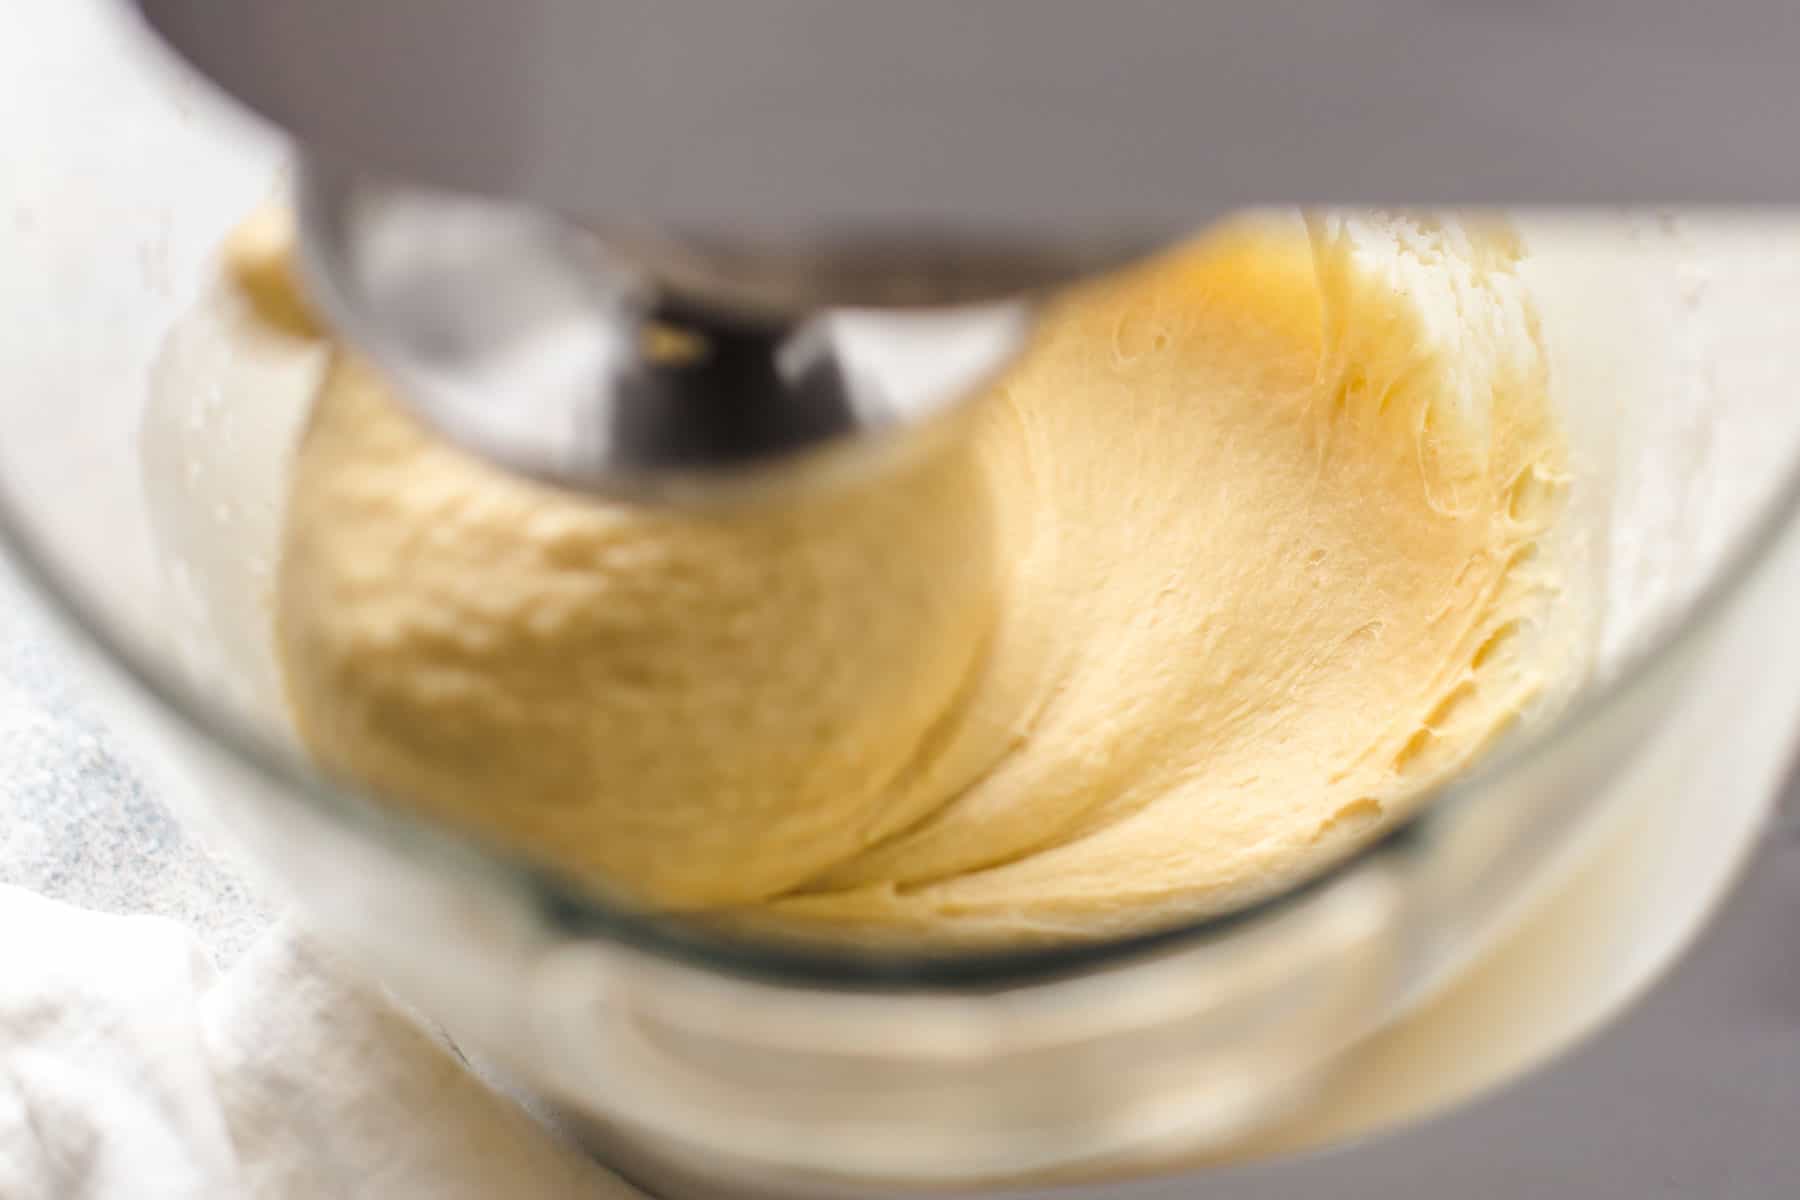 mixing yeast dough in a stand mixer